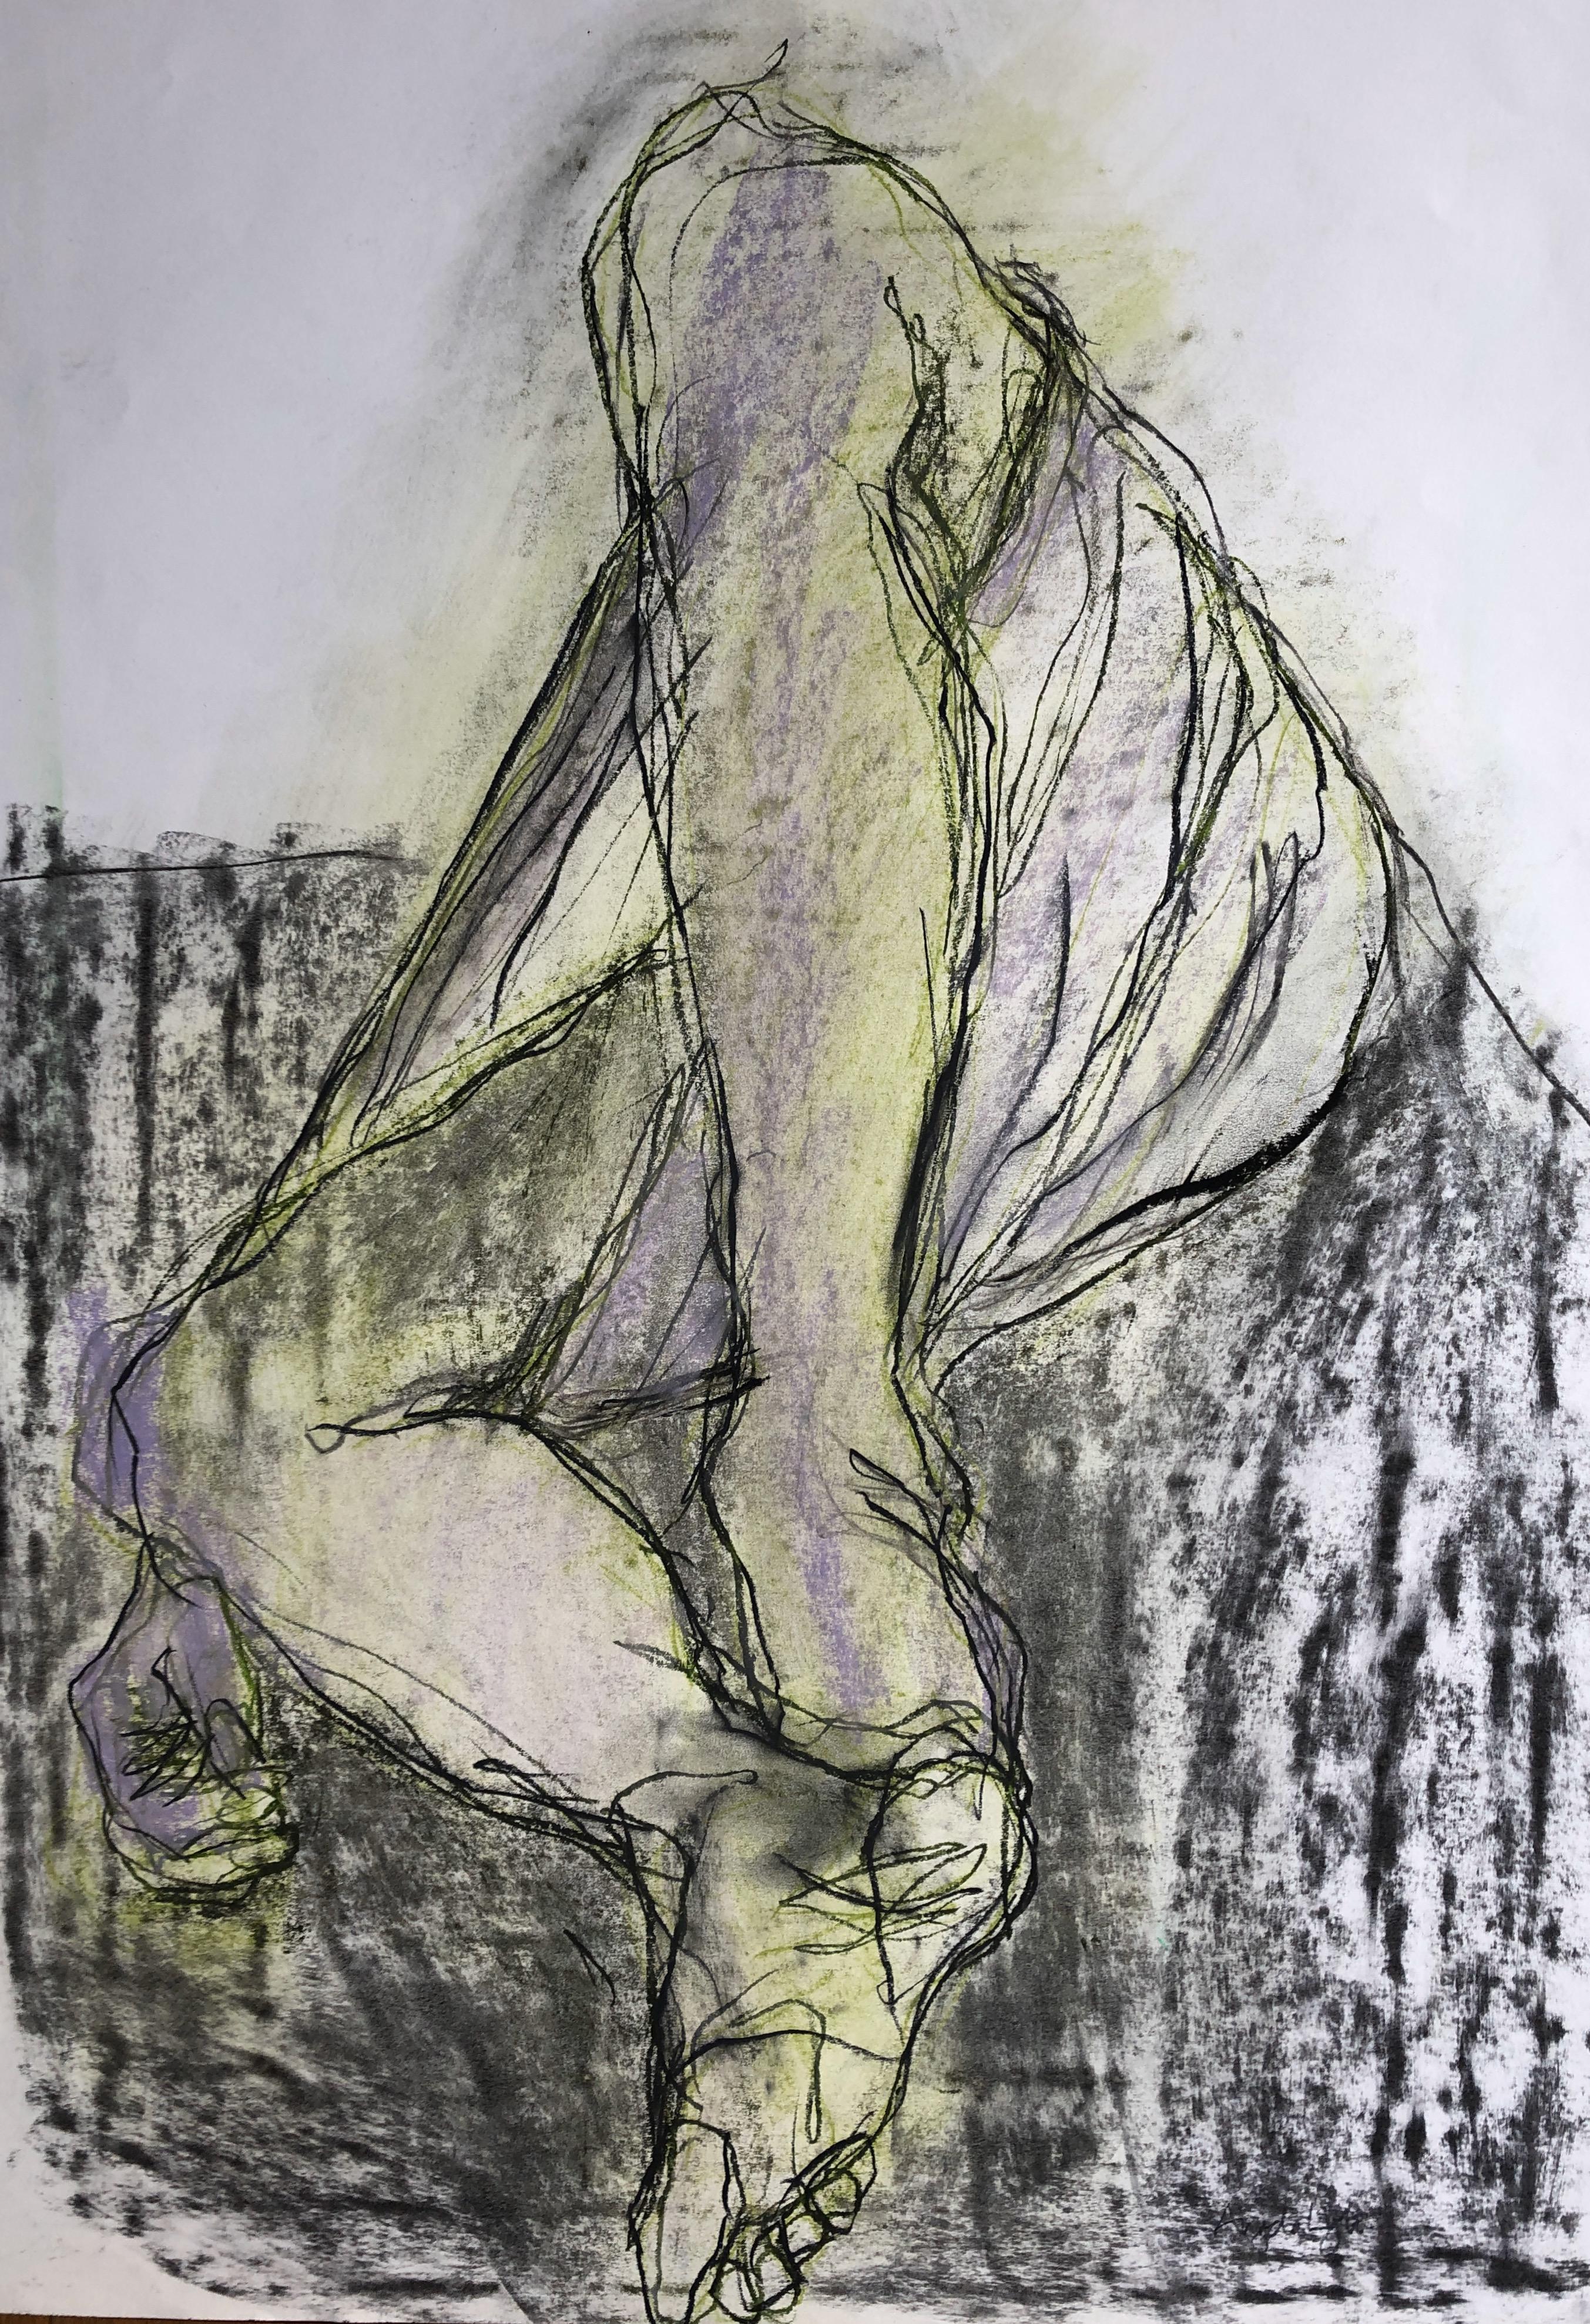 Man In Sarong. Contemporary Mixed Media on paper